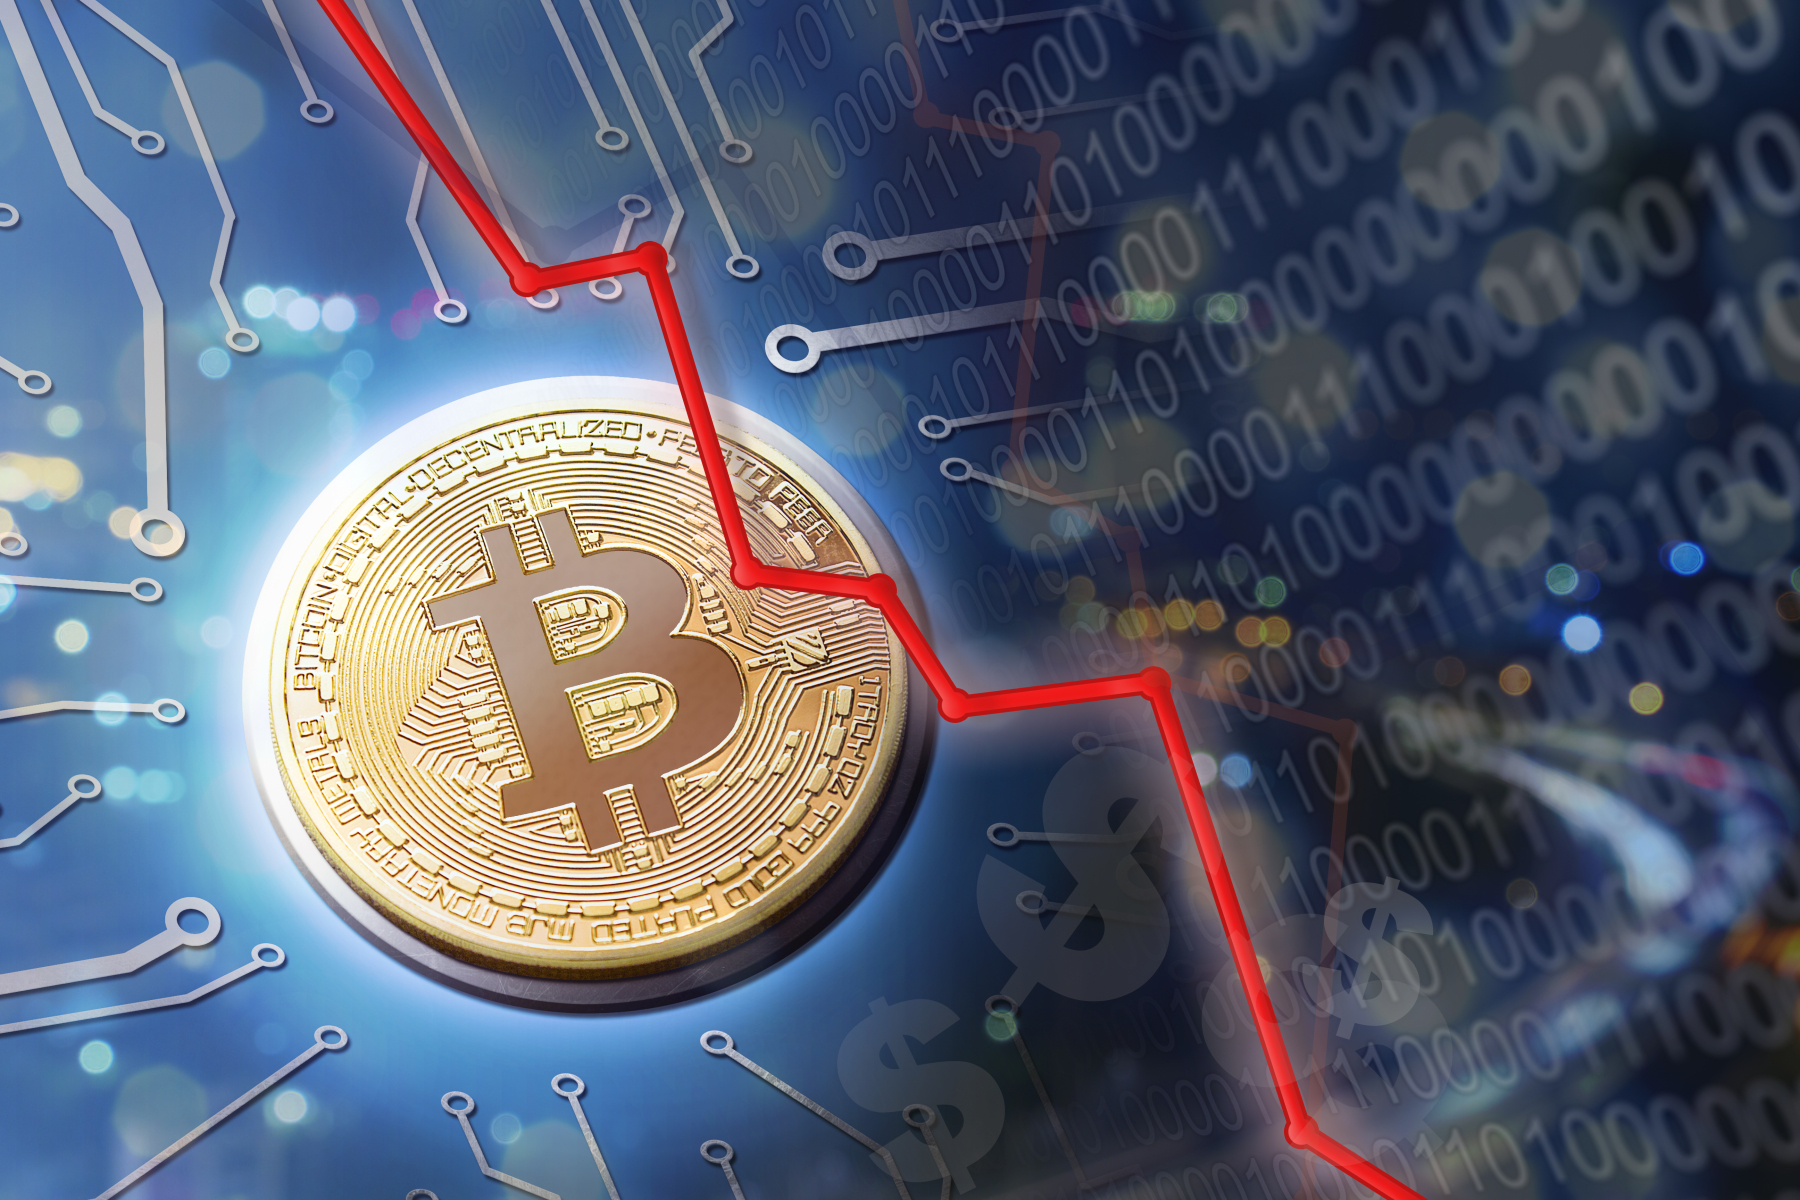 VanEck: “Bitcoin price could fall to $10,000 in Q1 2023”
